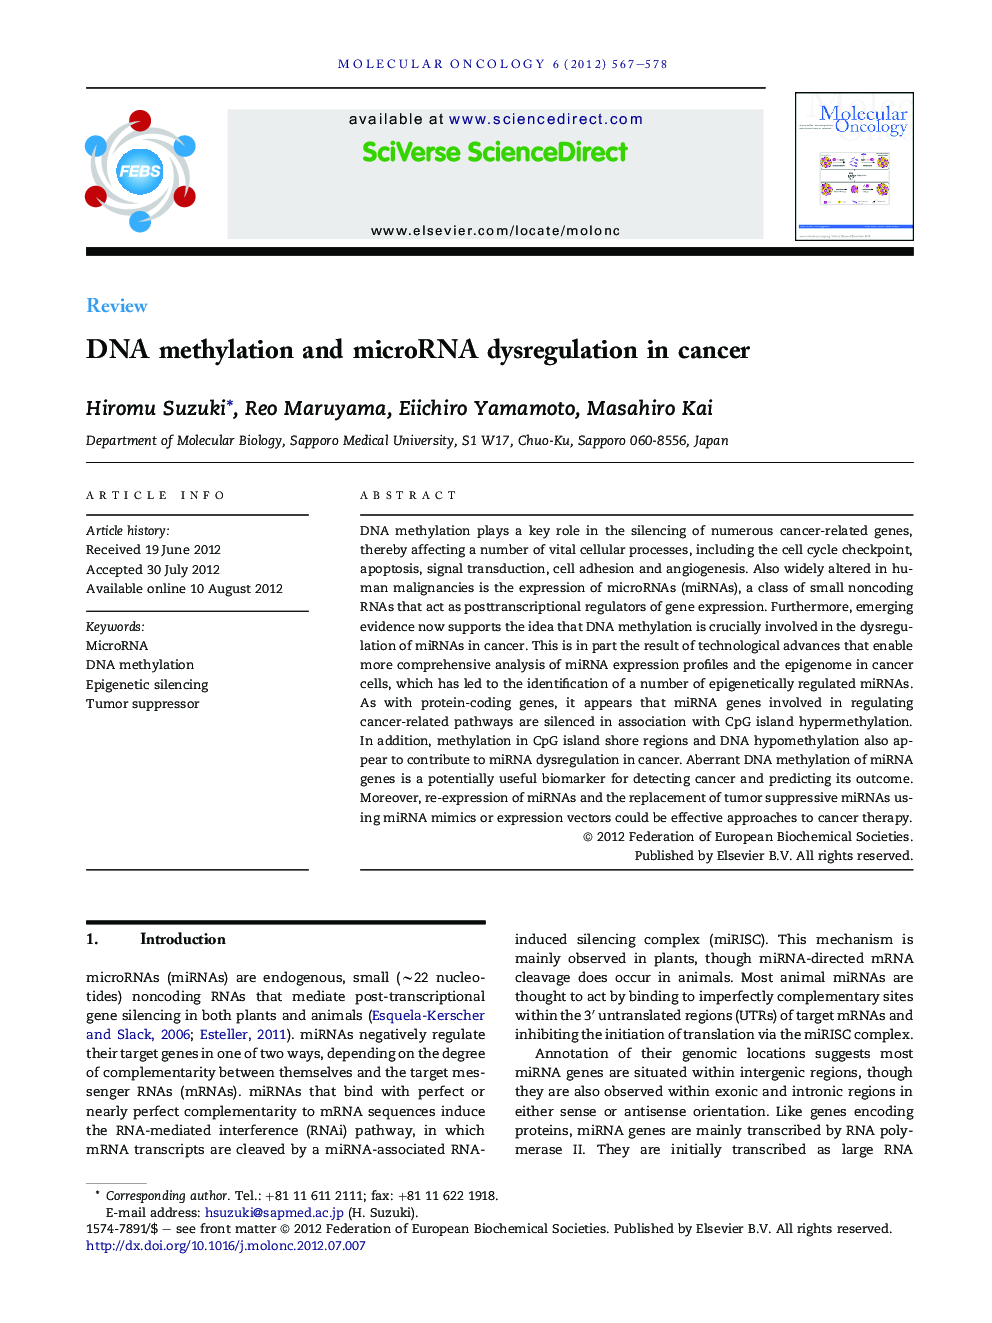 DNA methylation and microRNA dysregulation in cancer